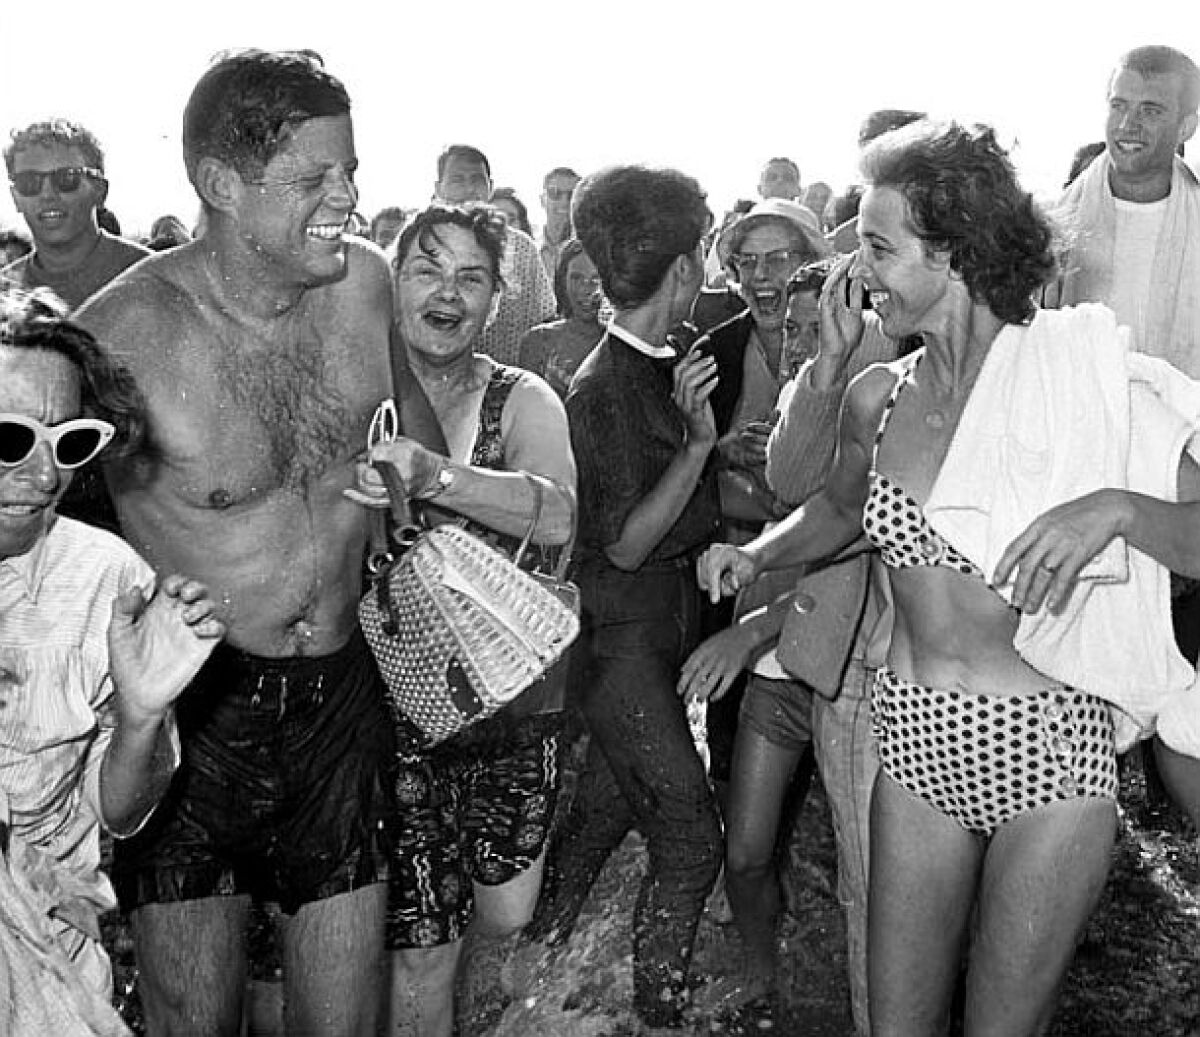 President Kennedy in an iconic beach photo taken by Times photographer Bill Beebe in 1962.